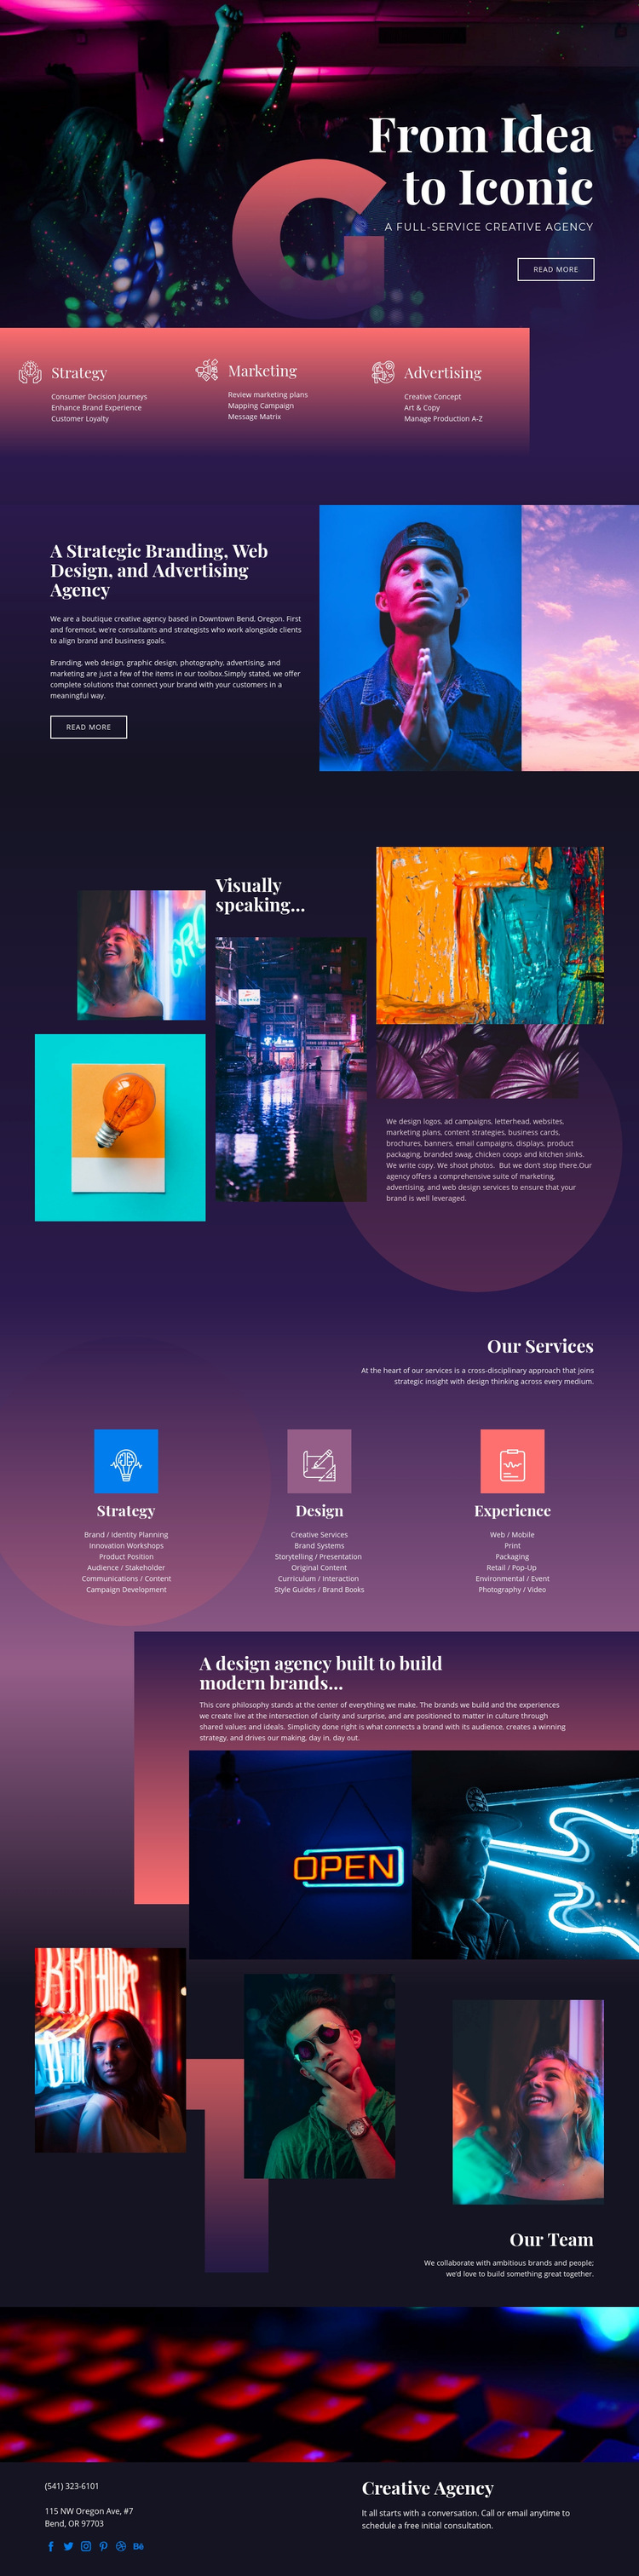 Iconic ideas of art Web Page Design